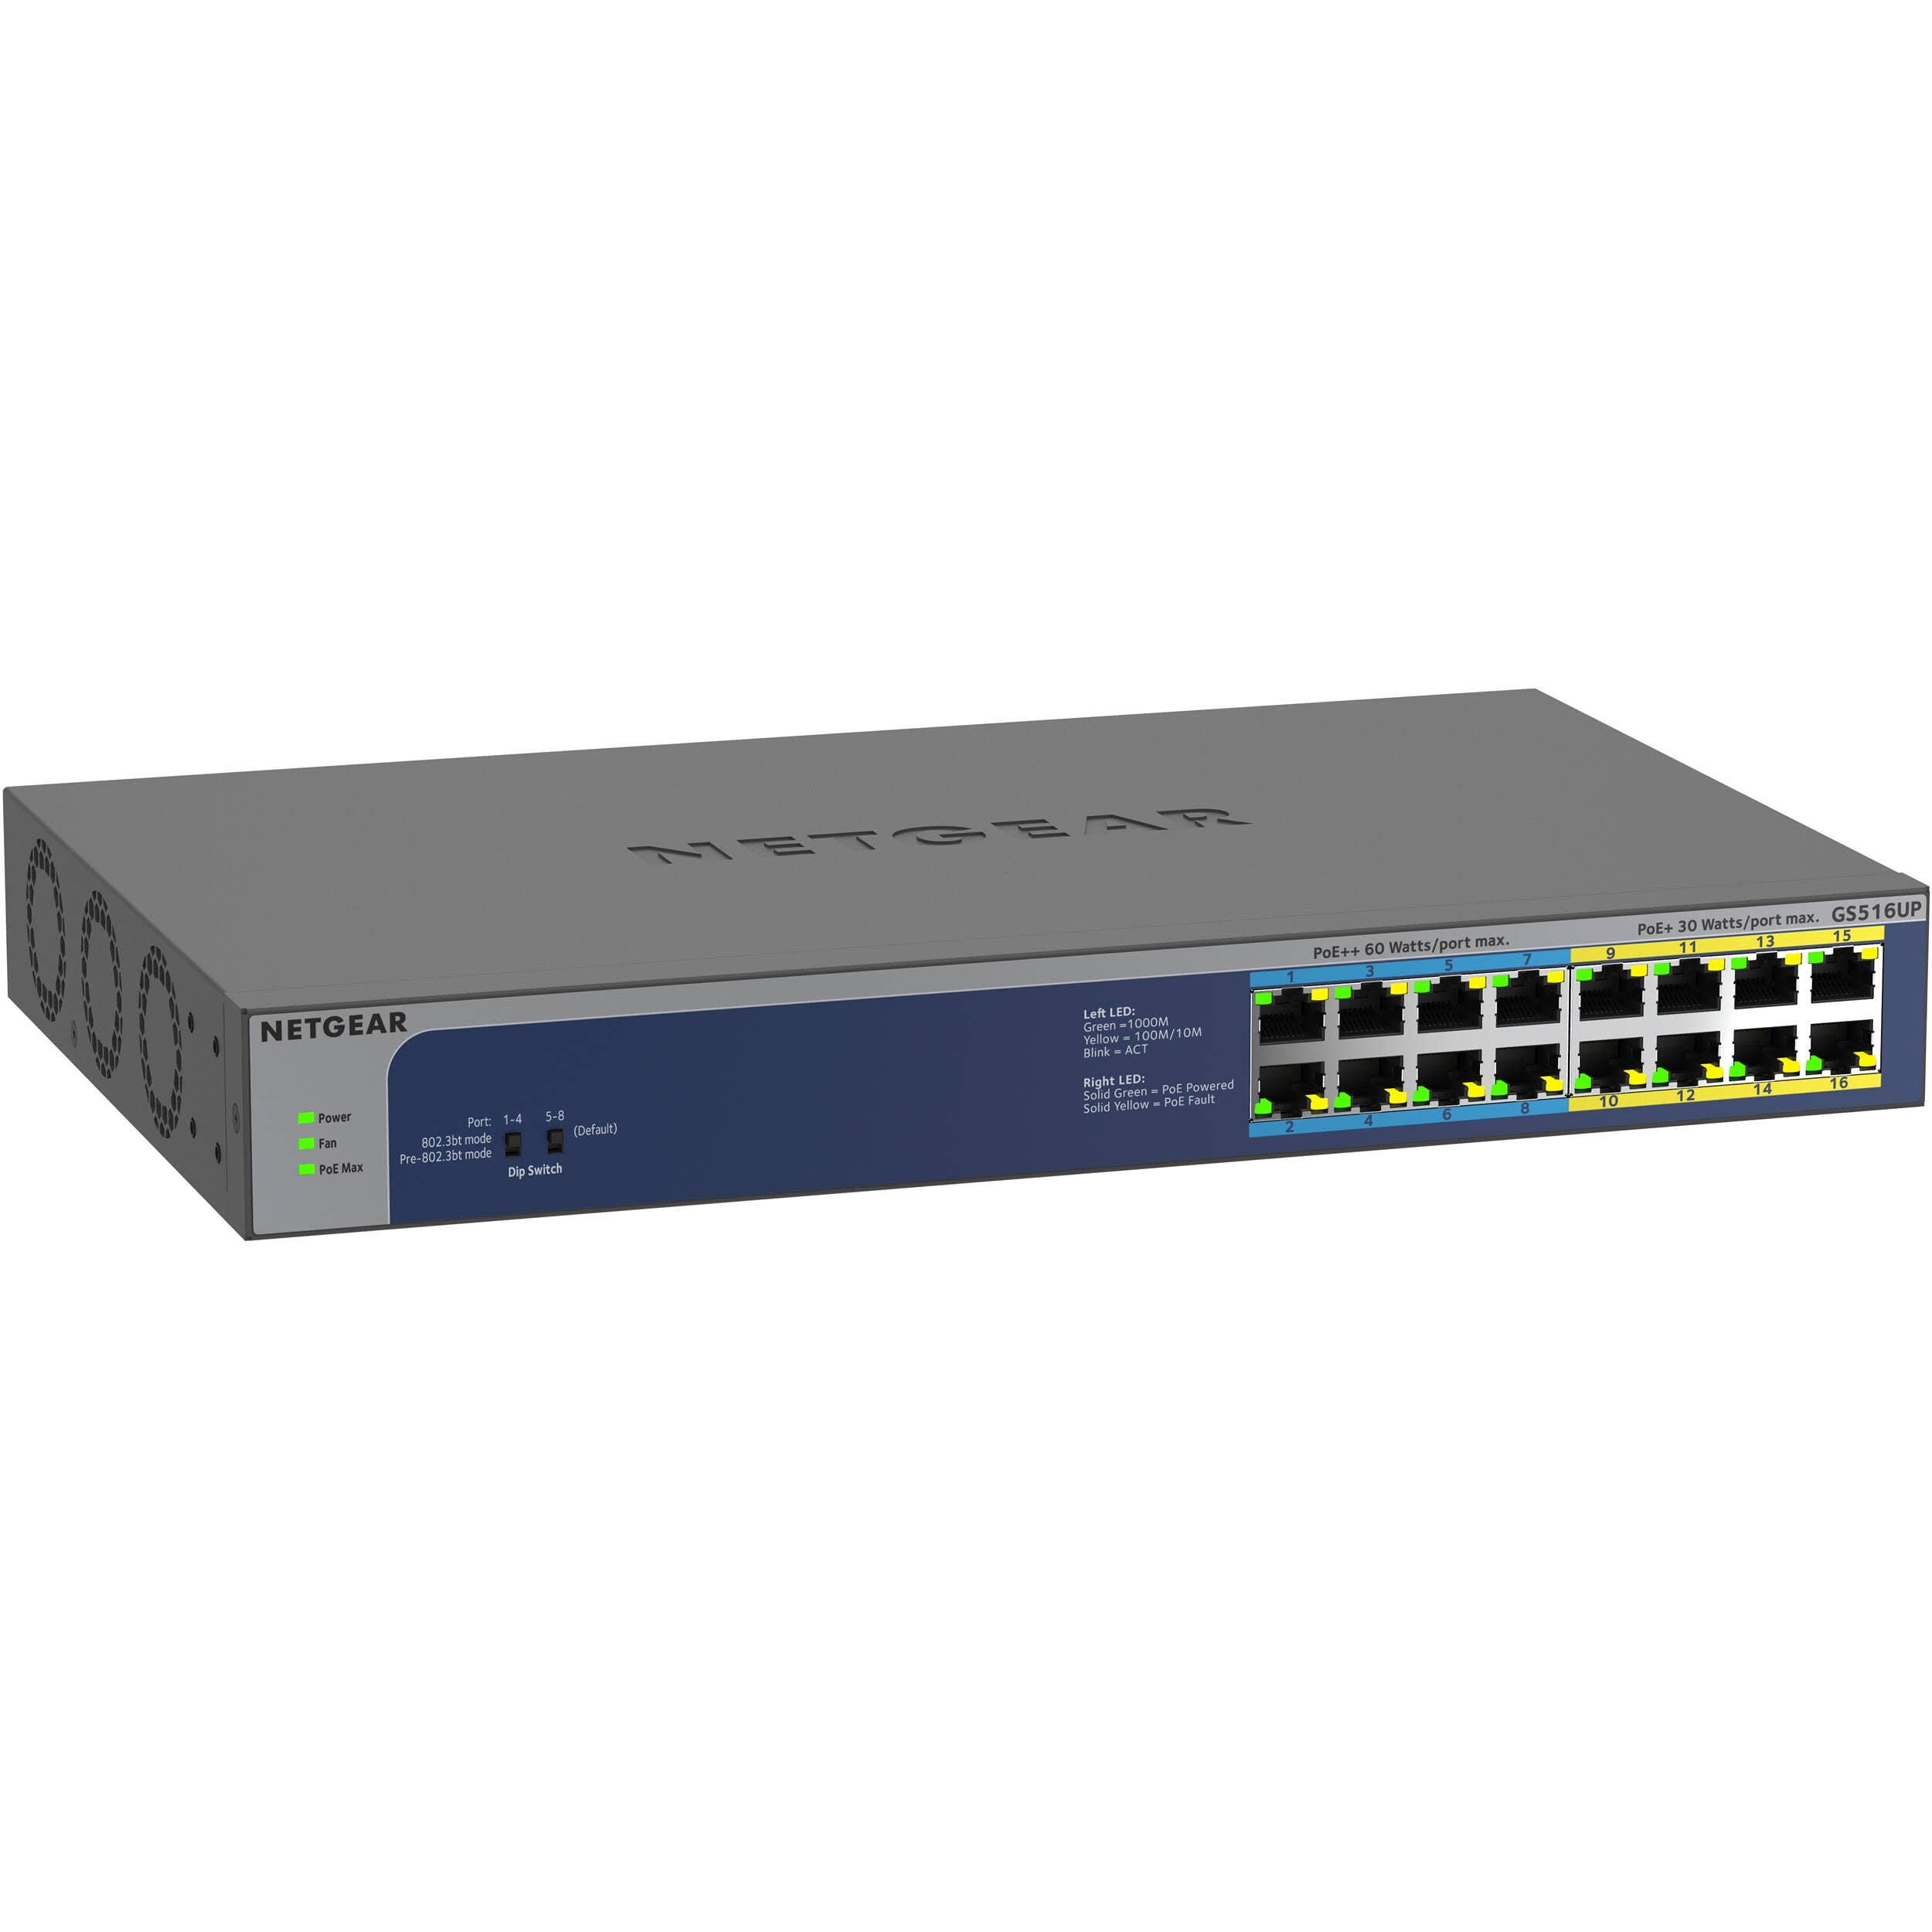 NETGEAR 16-Port Gigabit Ethernet High-Power PoE+ Unmanaged Switch with 8- Ports. Gray 